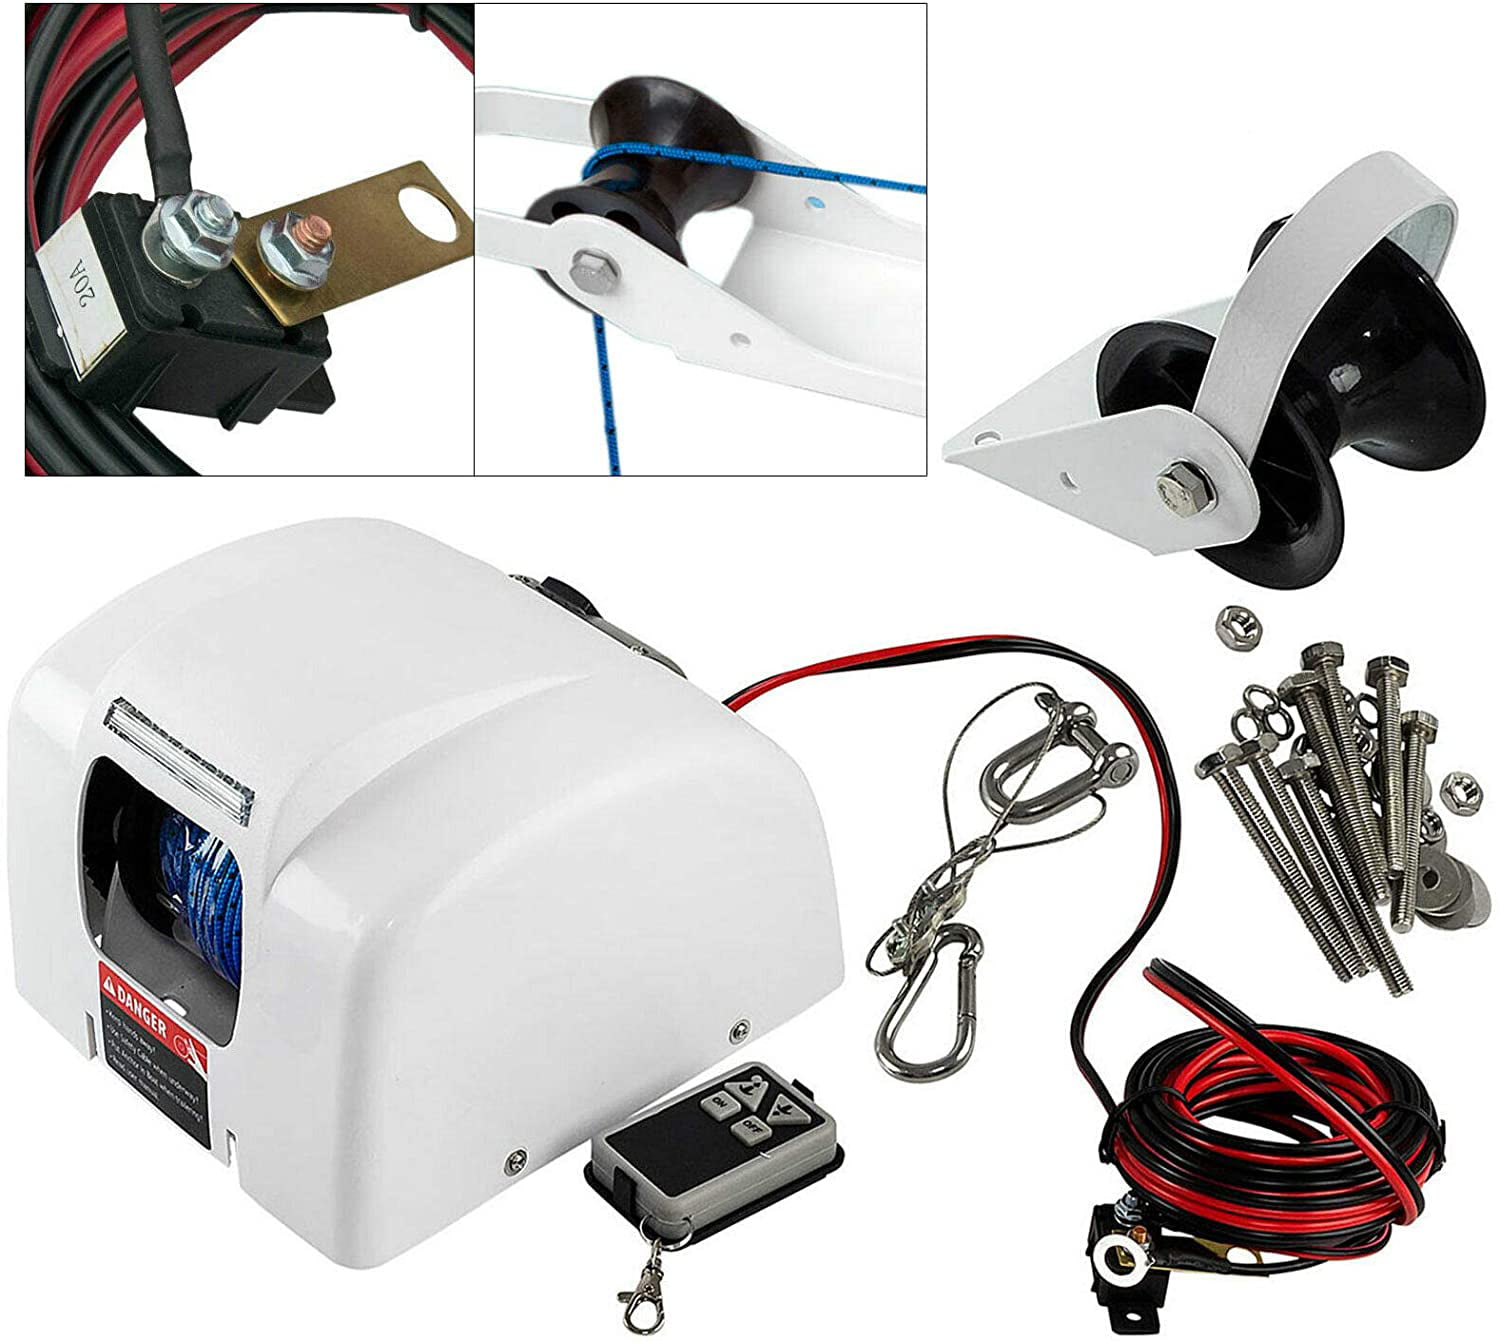 Heavy Duty Towing Winches for Small Boat Fishing Boat Electric Anchor winch 25LBS, White Marine Anchor Winch 12V,Saltwater Boat Anchor Windlass Kit with Wireless Remote Control,anchors Up to 25 LBS 